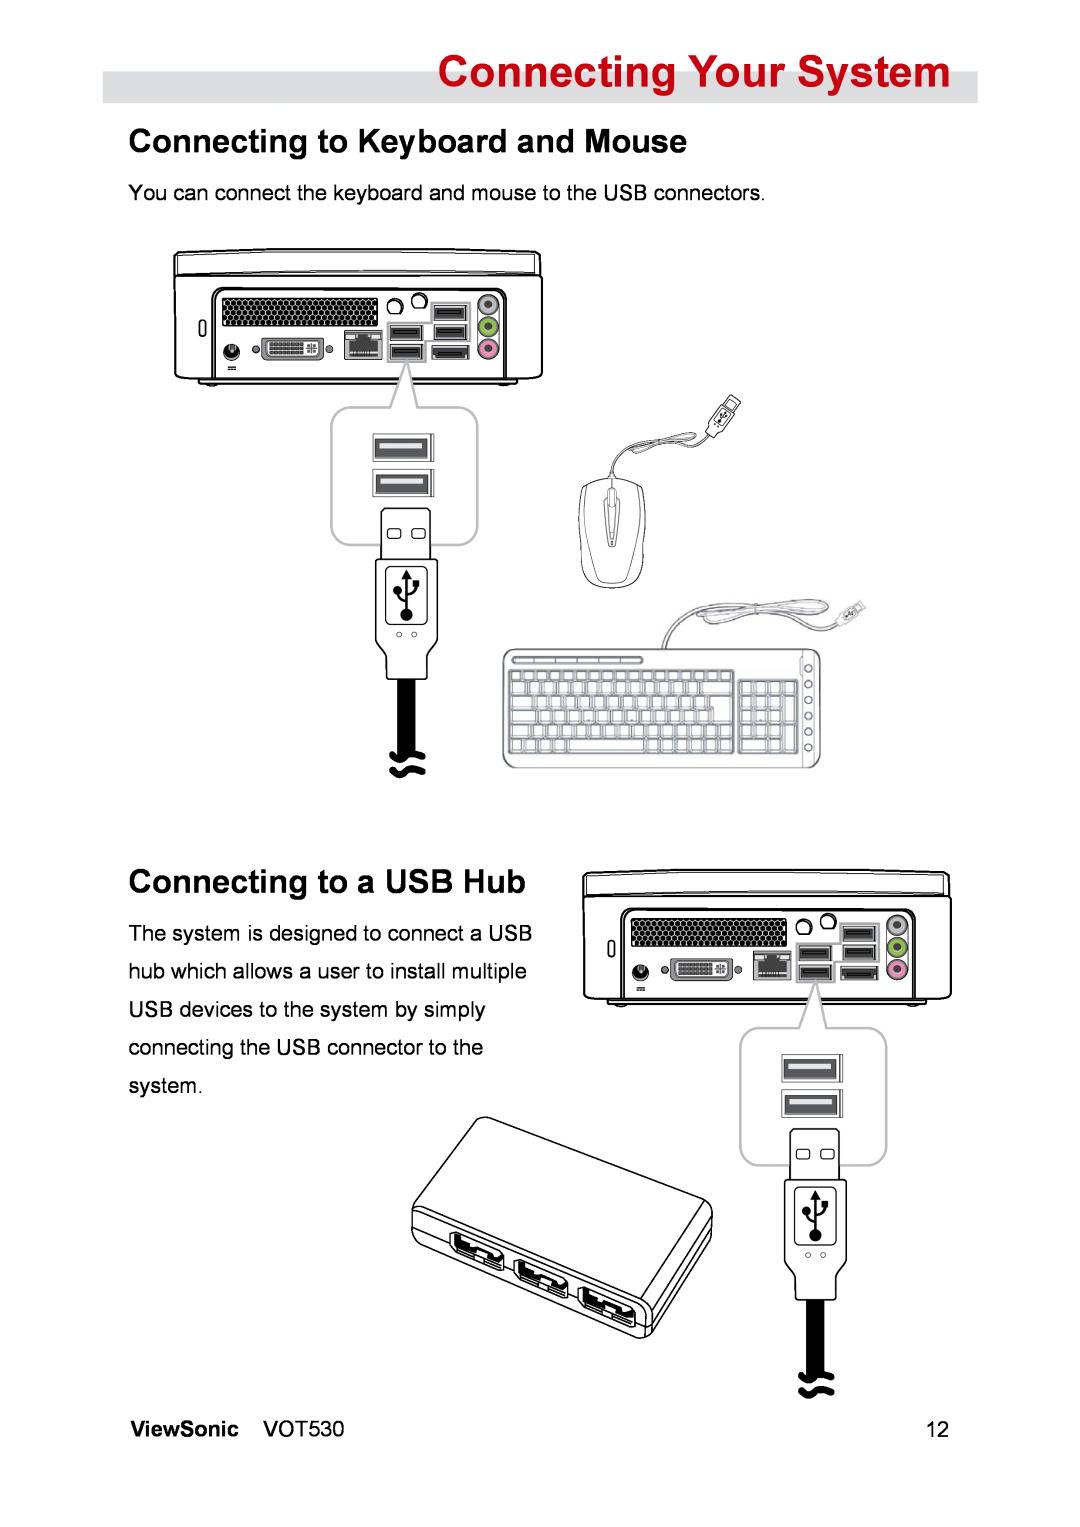 ViewSonic VS12661 Connecting to Keyboard and Mouse, Connecting to a USB Hub, Connecting Your System, ViewSonic VOT530 